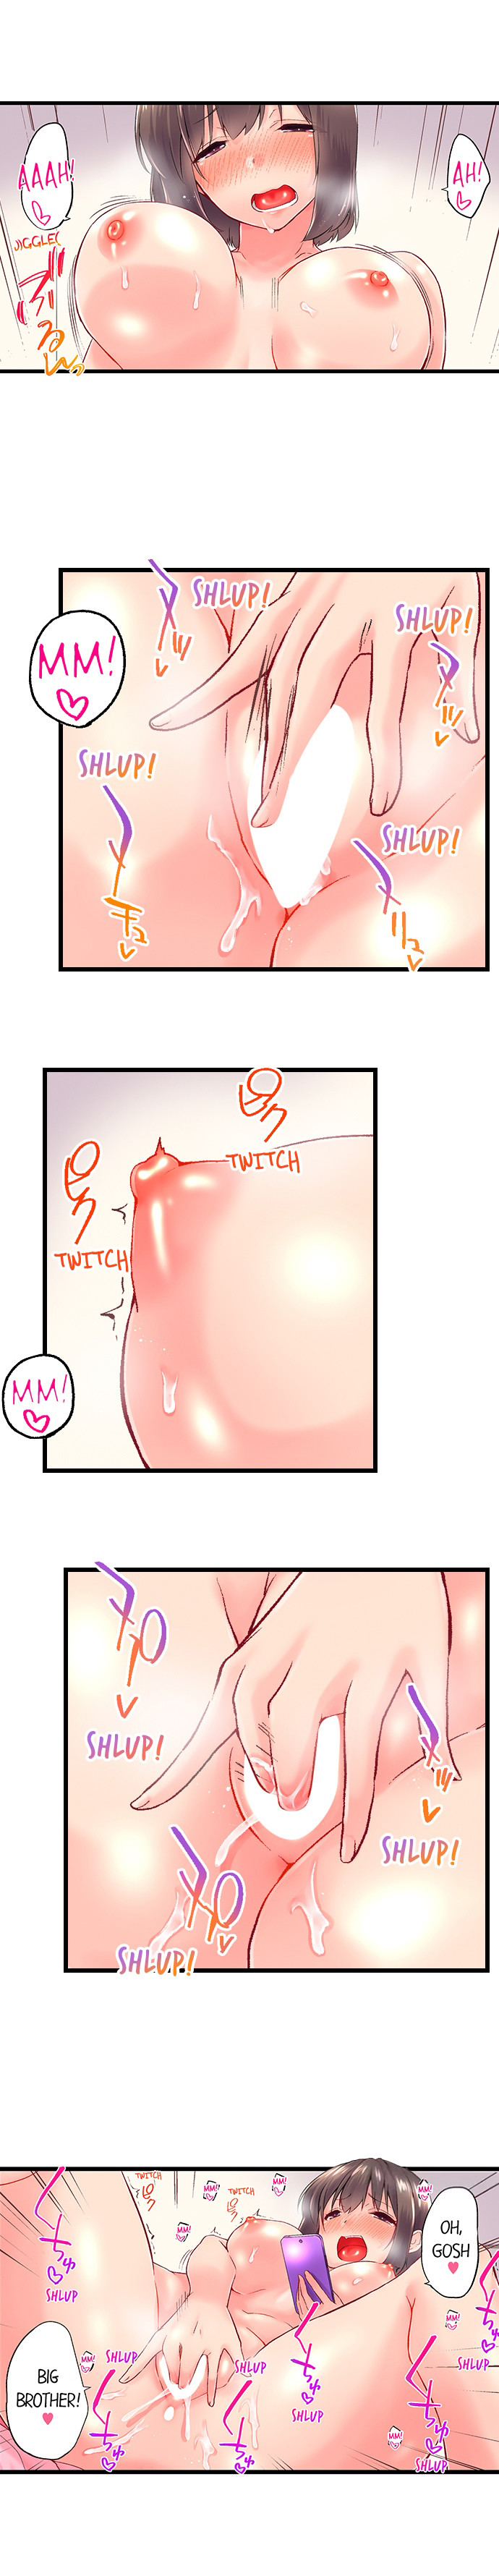 My Brother’s Slipped Inside Me in The Bathtub - Chapter 110 Page 8